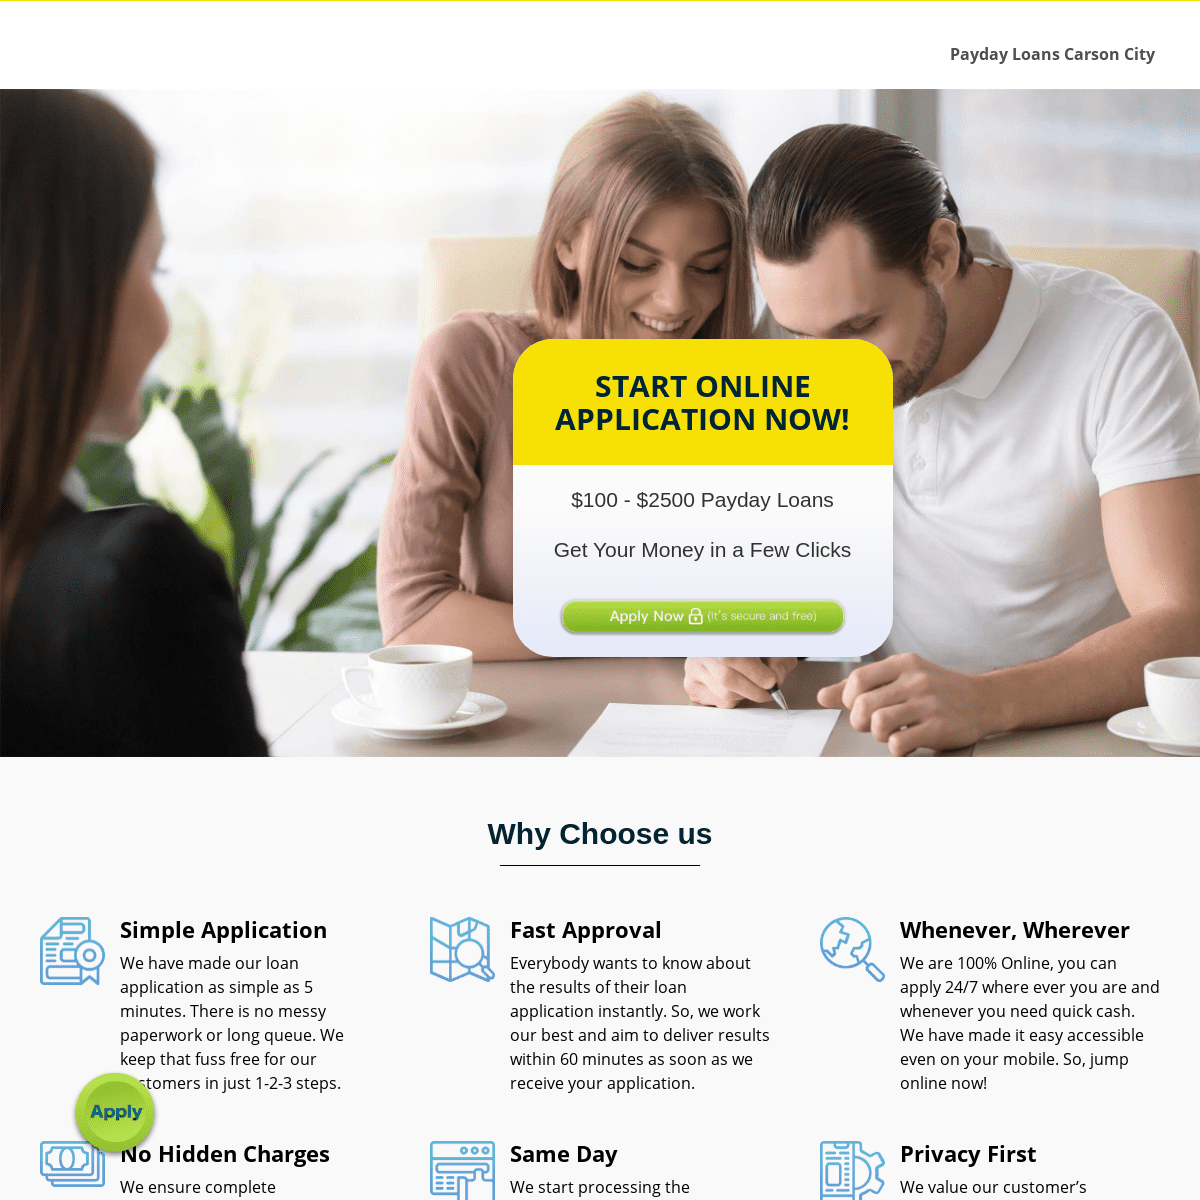 A complete backup of https://acmepaydayloans.com